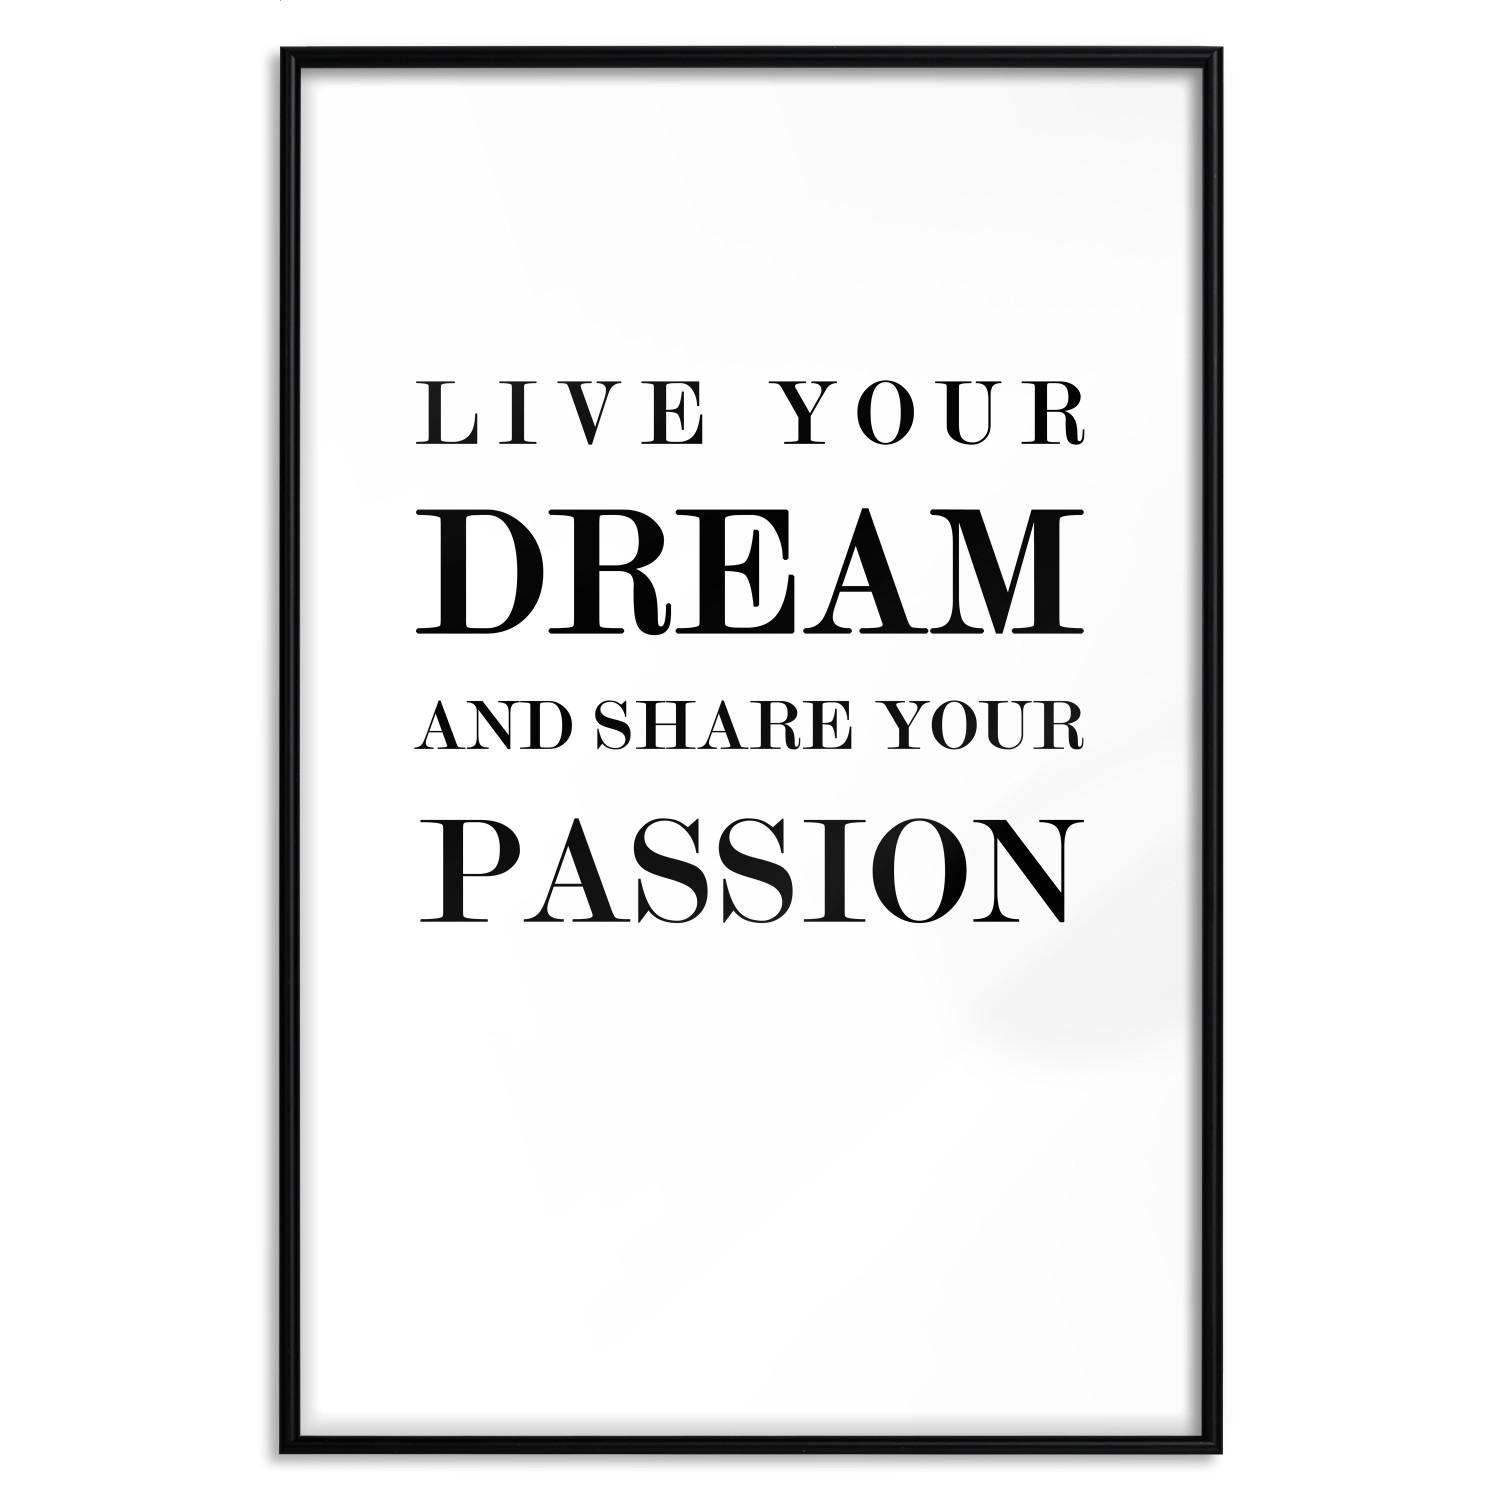 Gallery wall Live your dream and share your passion - black and white pattern with texts